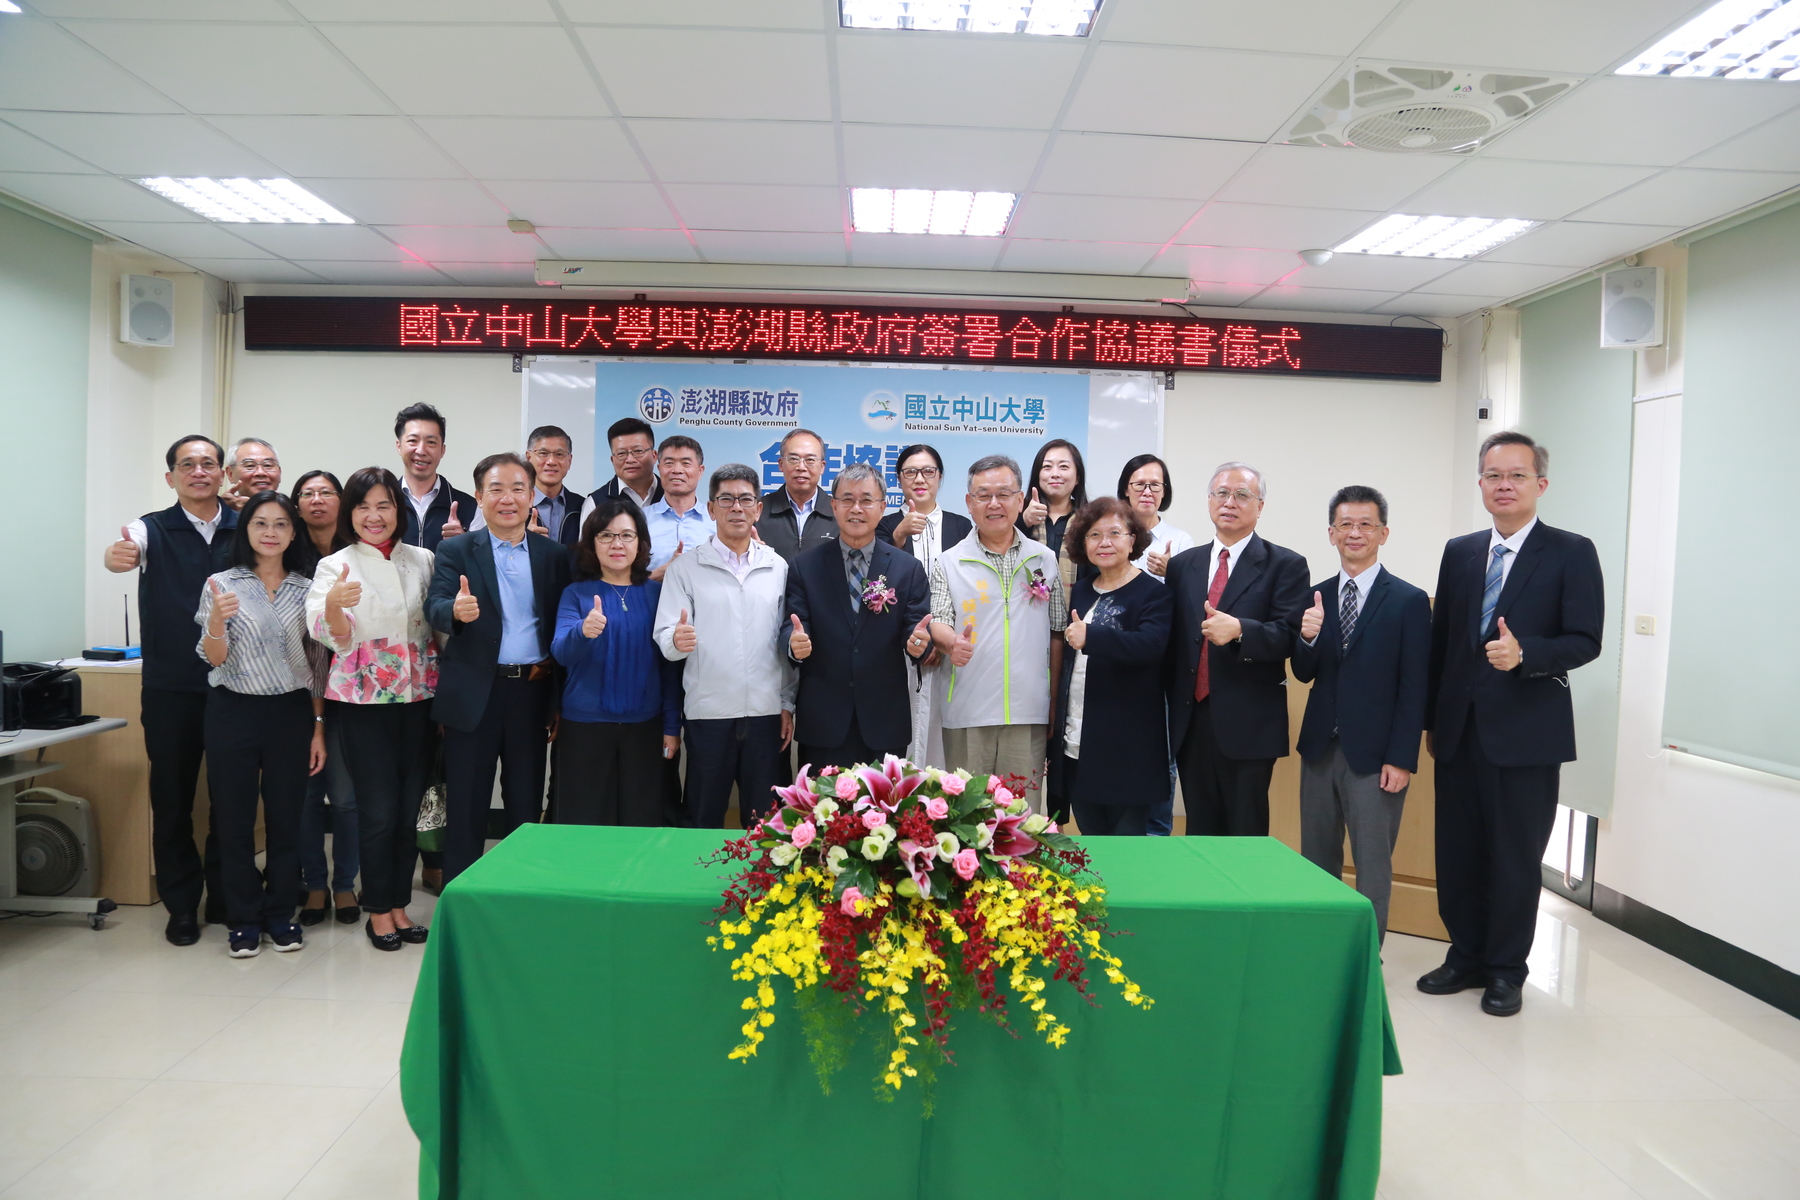 National Sun Yat-sen University applied for the establishment of the College of Medicine and tied a strategic alliance with the Penghu County Government.